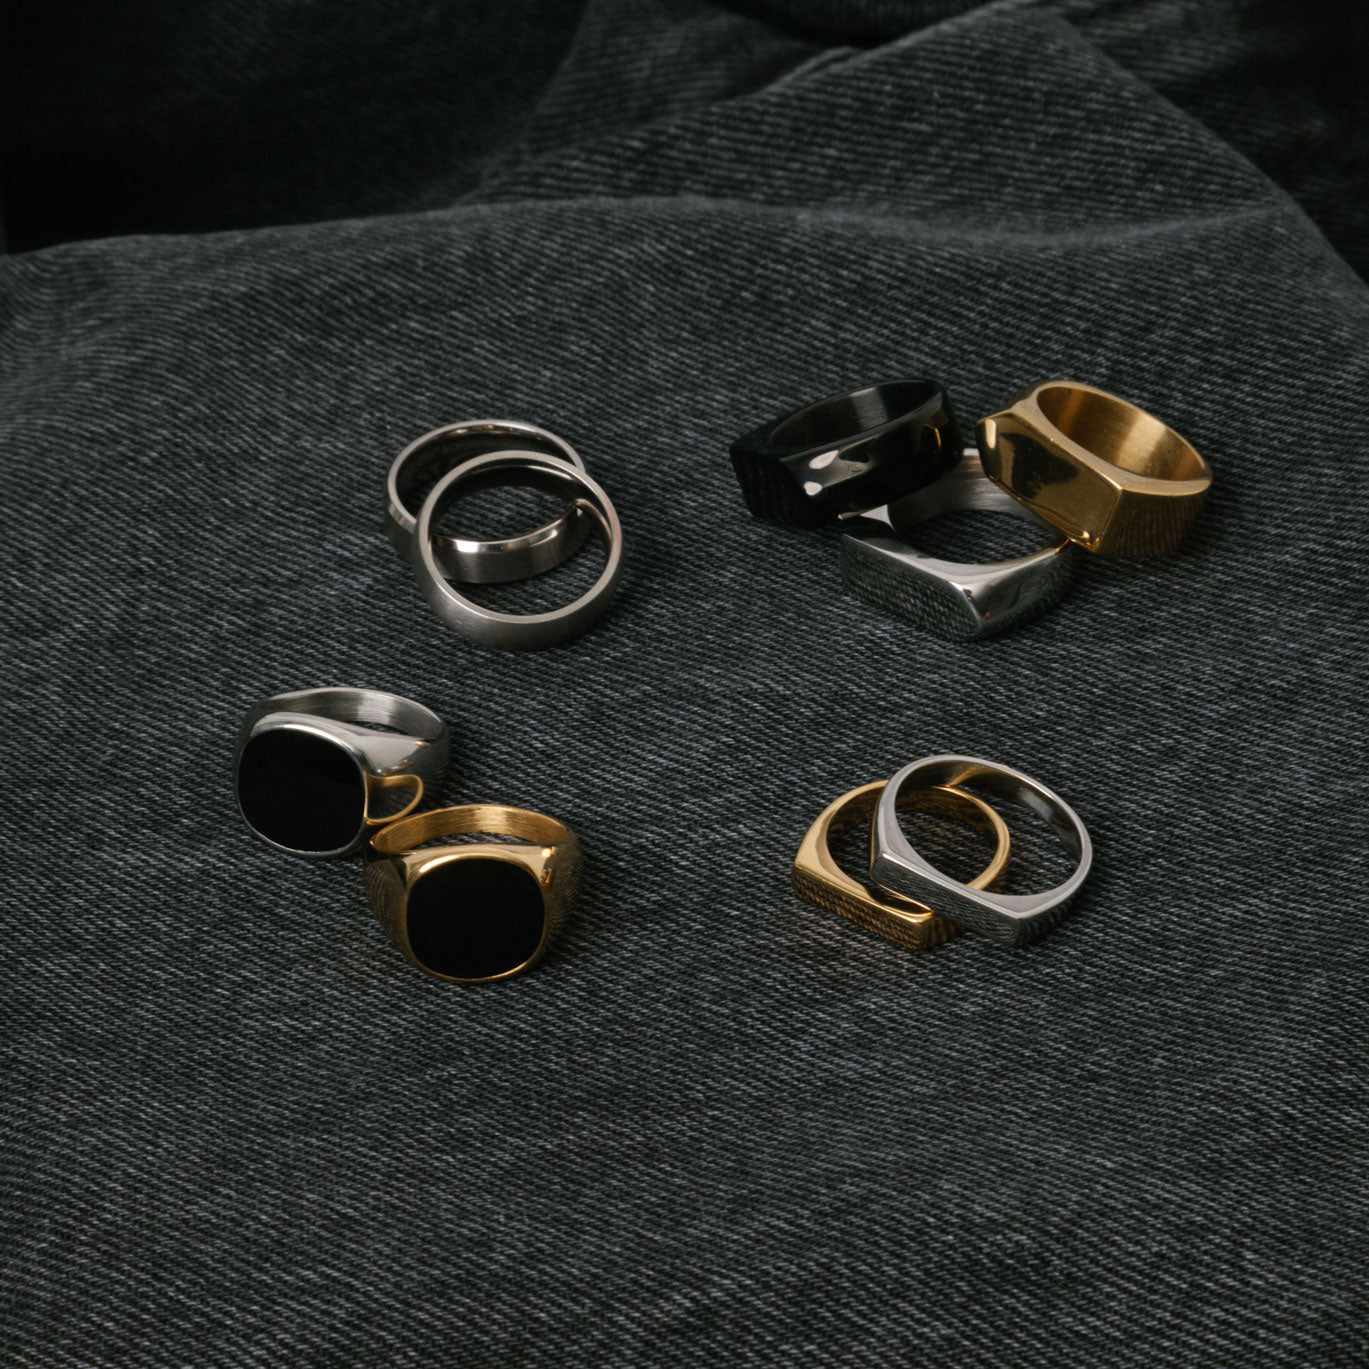 Image of the Smooth Cigar Band Ring is crafted out of titanium, with a 6mm width.